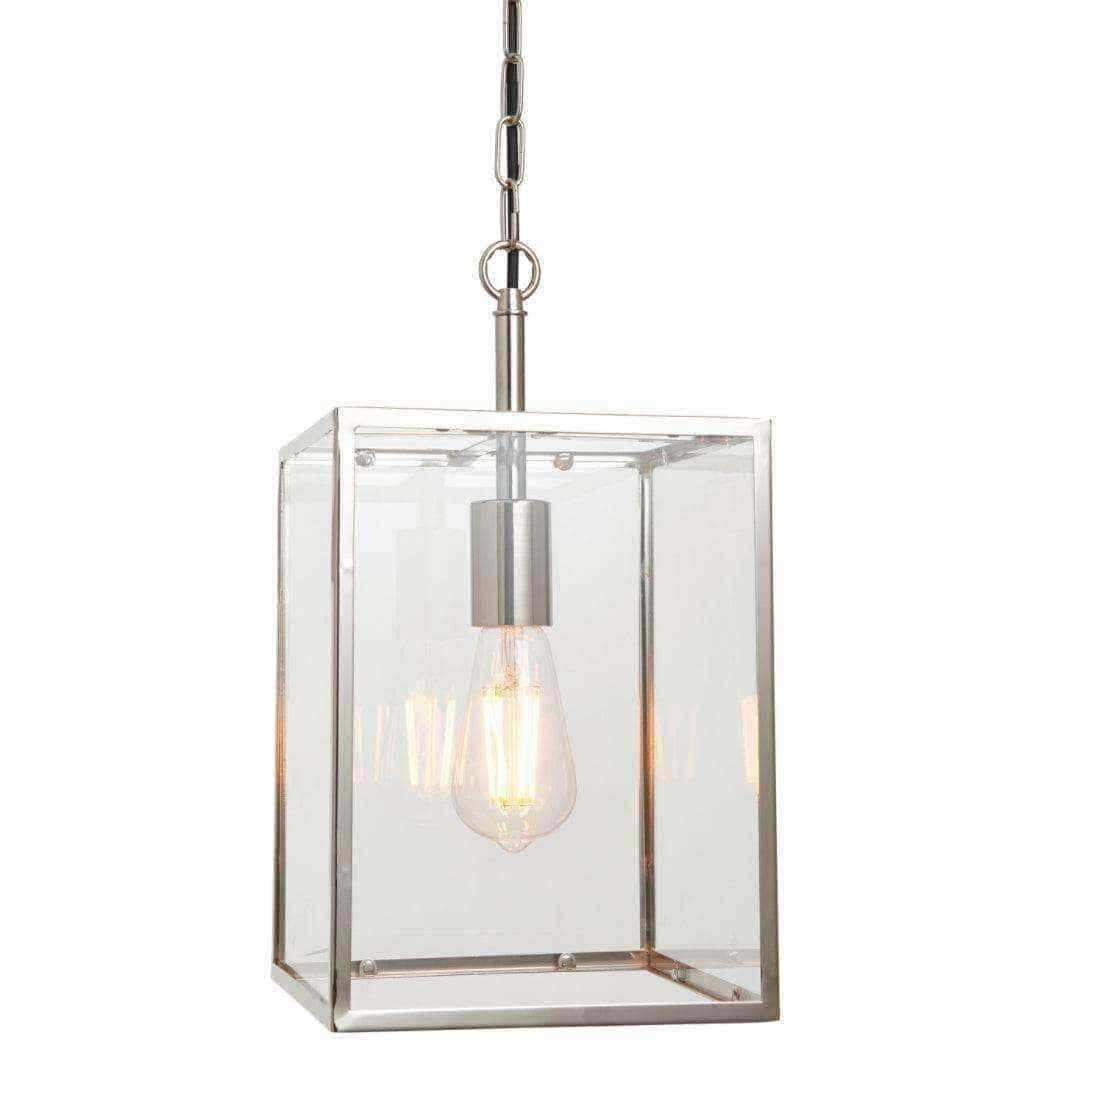 Polished Nickel Plated Box Pendant Light - The Farthing